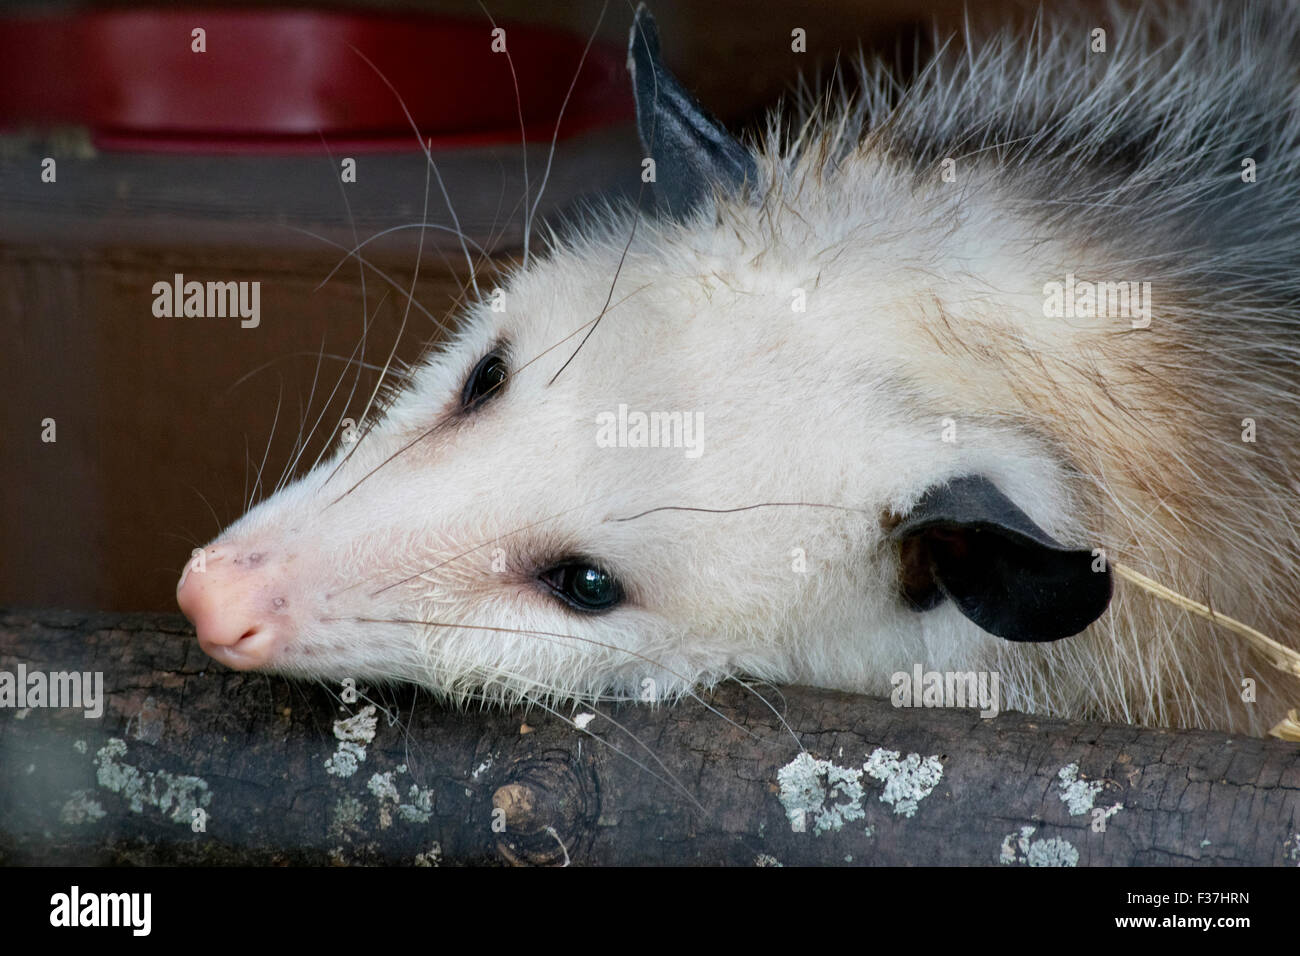 Close-up of an Opossum at the Eco-museum. Stock Photo